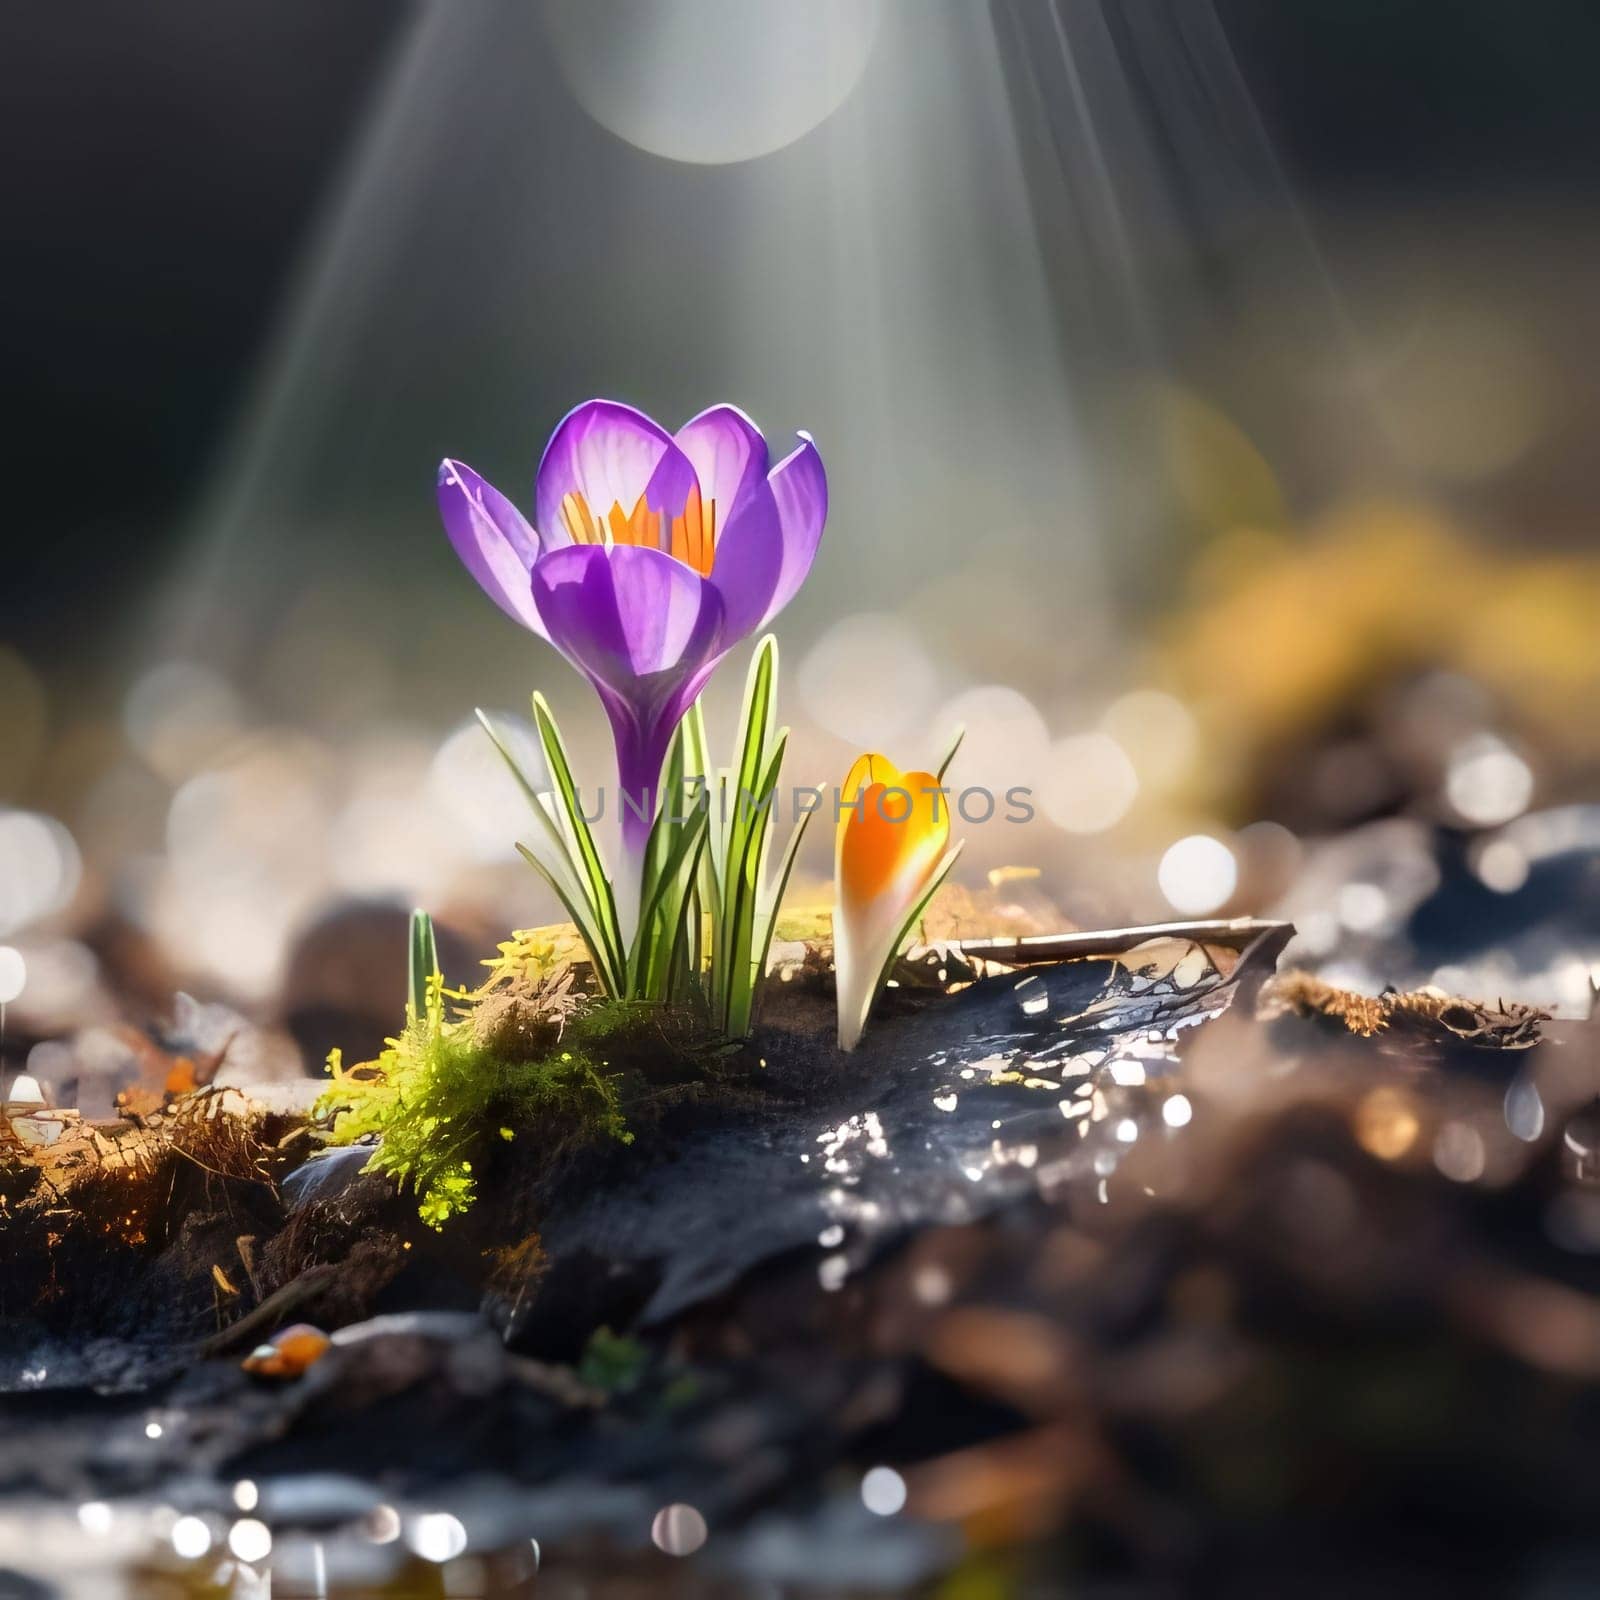 Purple crocuses growing in the middle of the moss in the sunlight. Flowering flowers, a symbol of spring, new life. A joyful time of nature waking up to life.